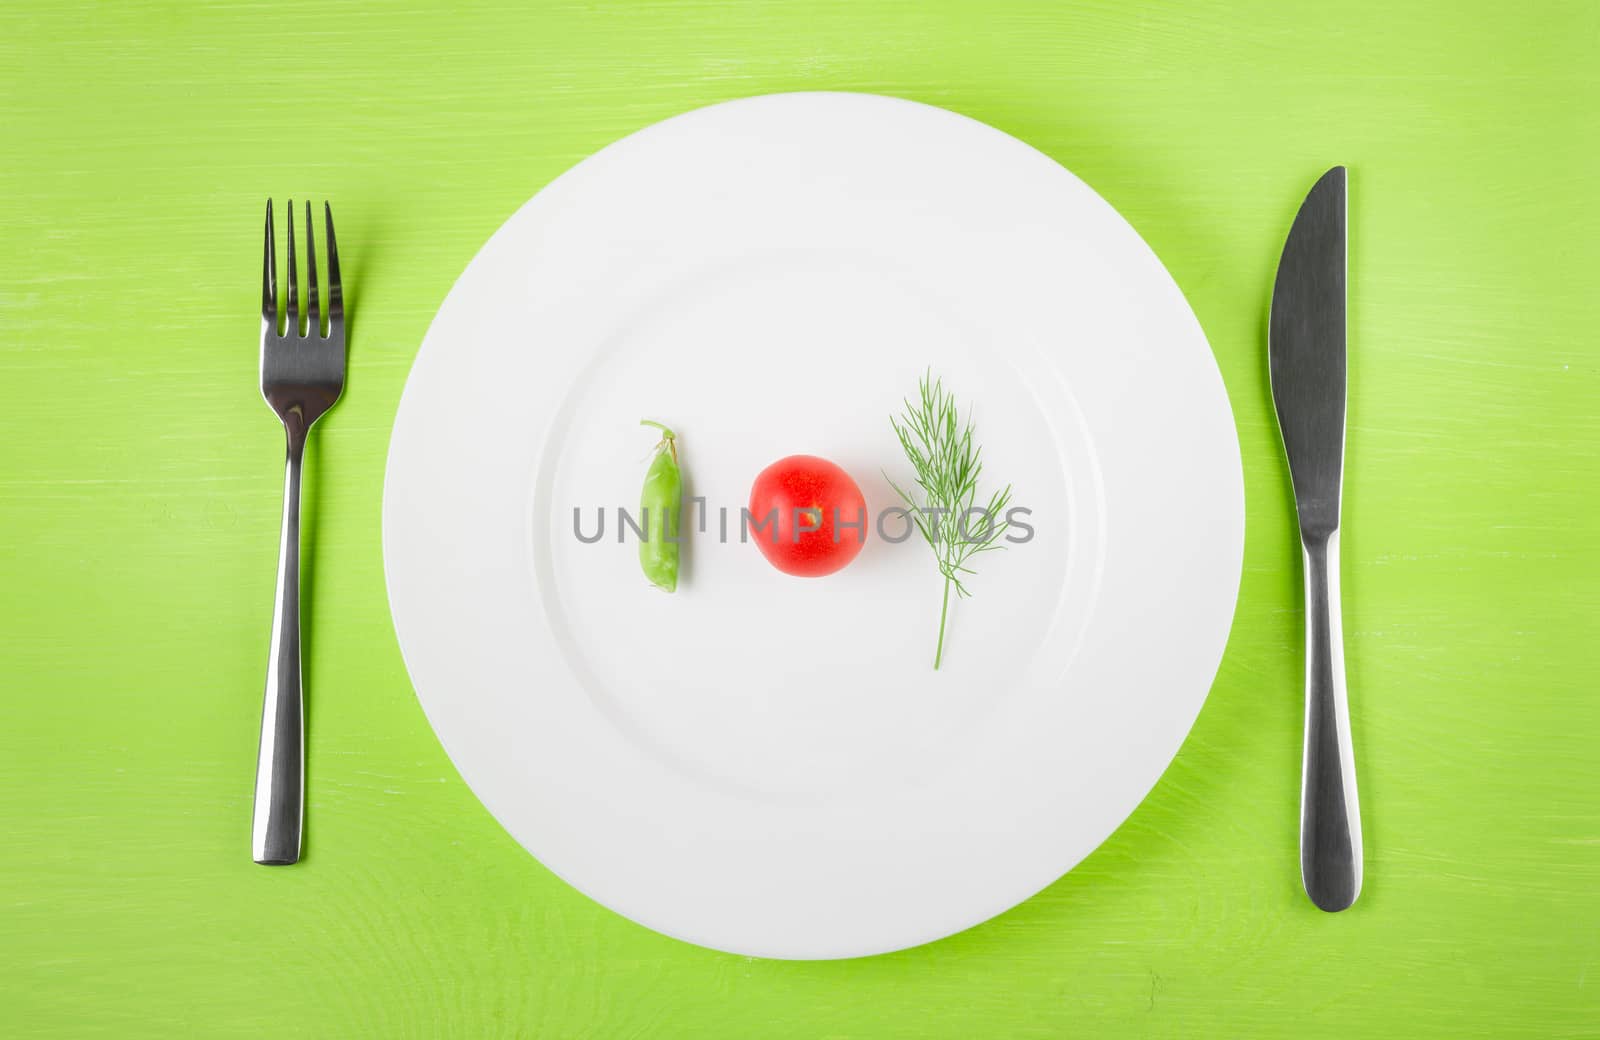 the concept of dietary restrictions, healthy lifestyle, diet,  weight loss, anti-obesity, healthy diet. Small tomato, green peas, a sprig of dill on a plate, knife, fork on the table, top view